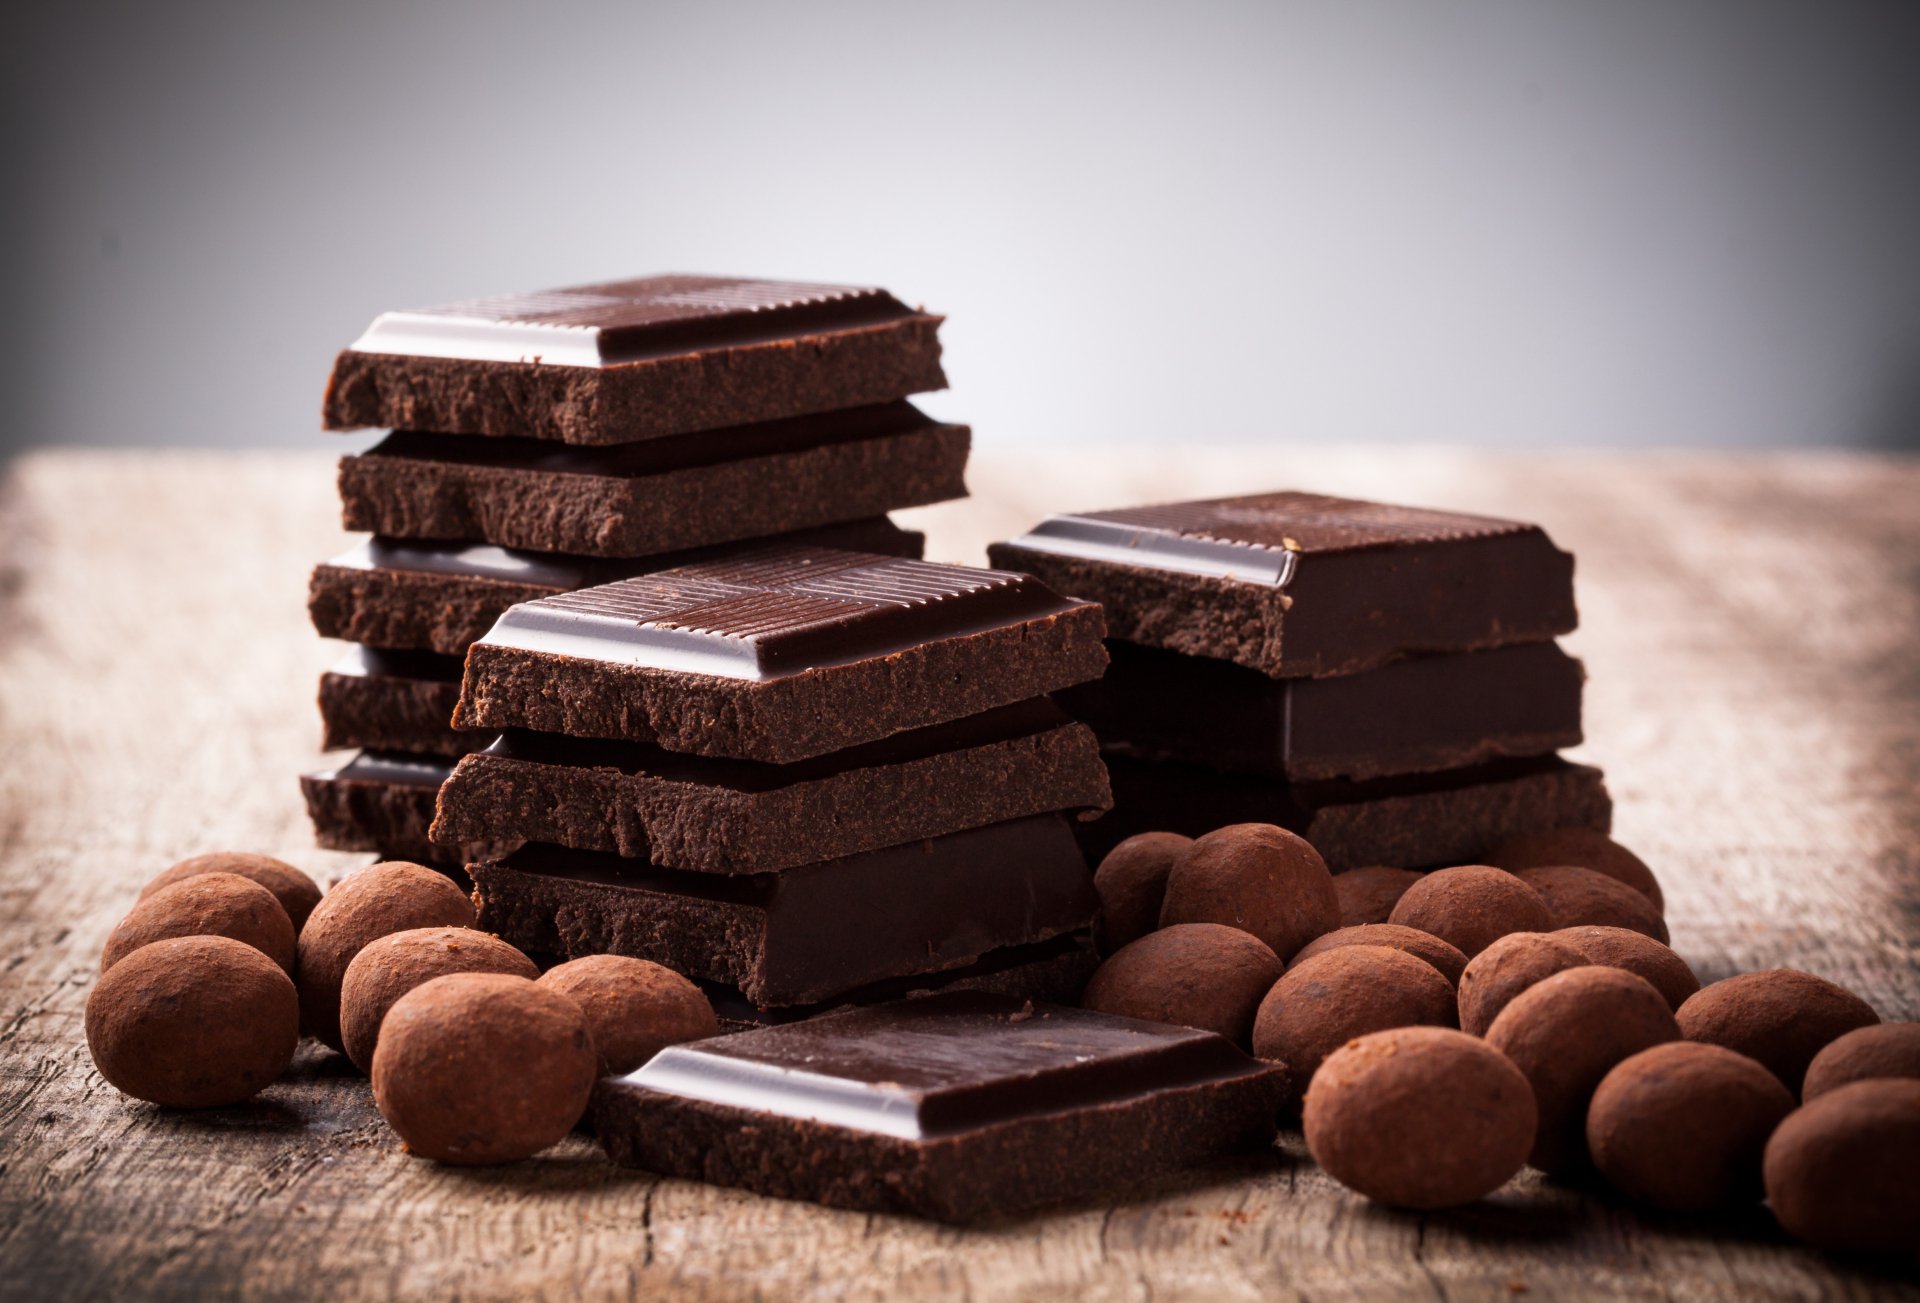 What is The Intricate Process of Chocolate Manufacturing From Bean to Bar